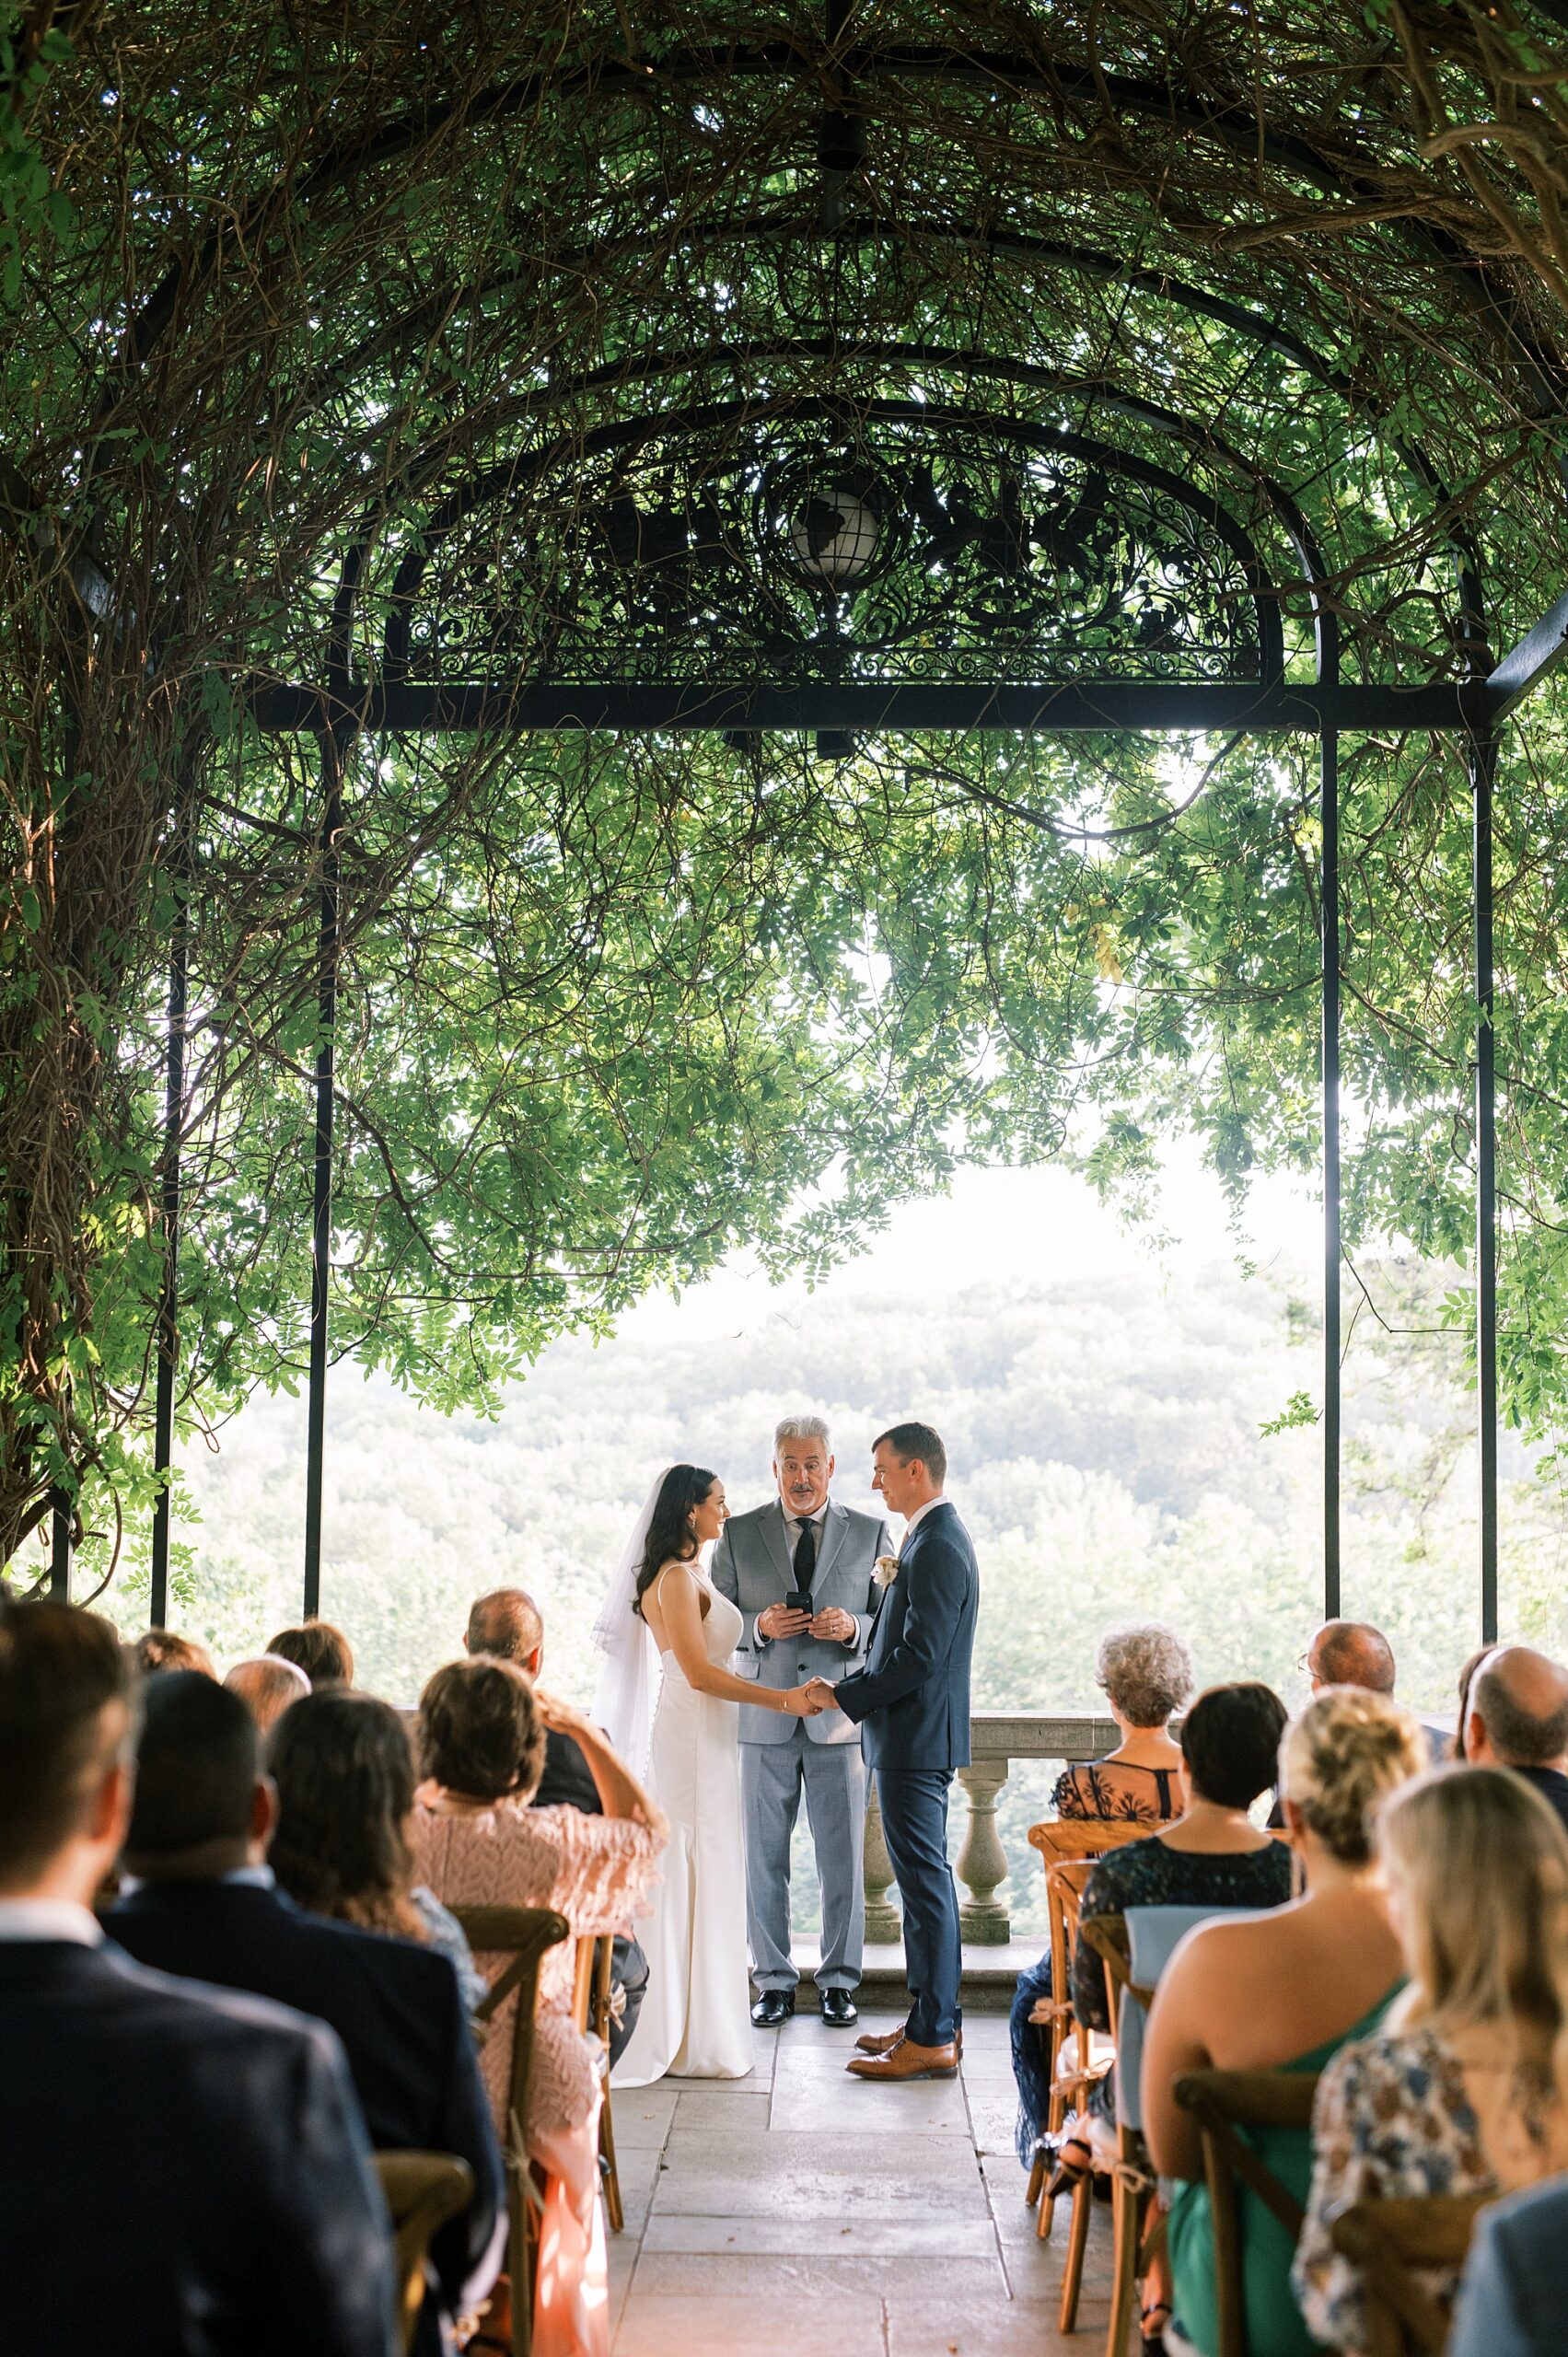 Intimate Wedding at Cheekwood Estate and Gardens under the Wisteria Arbor 